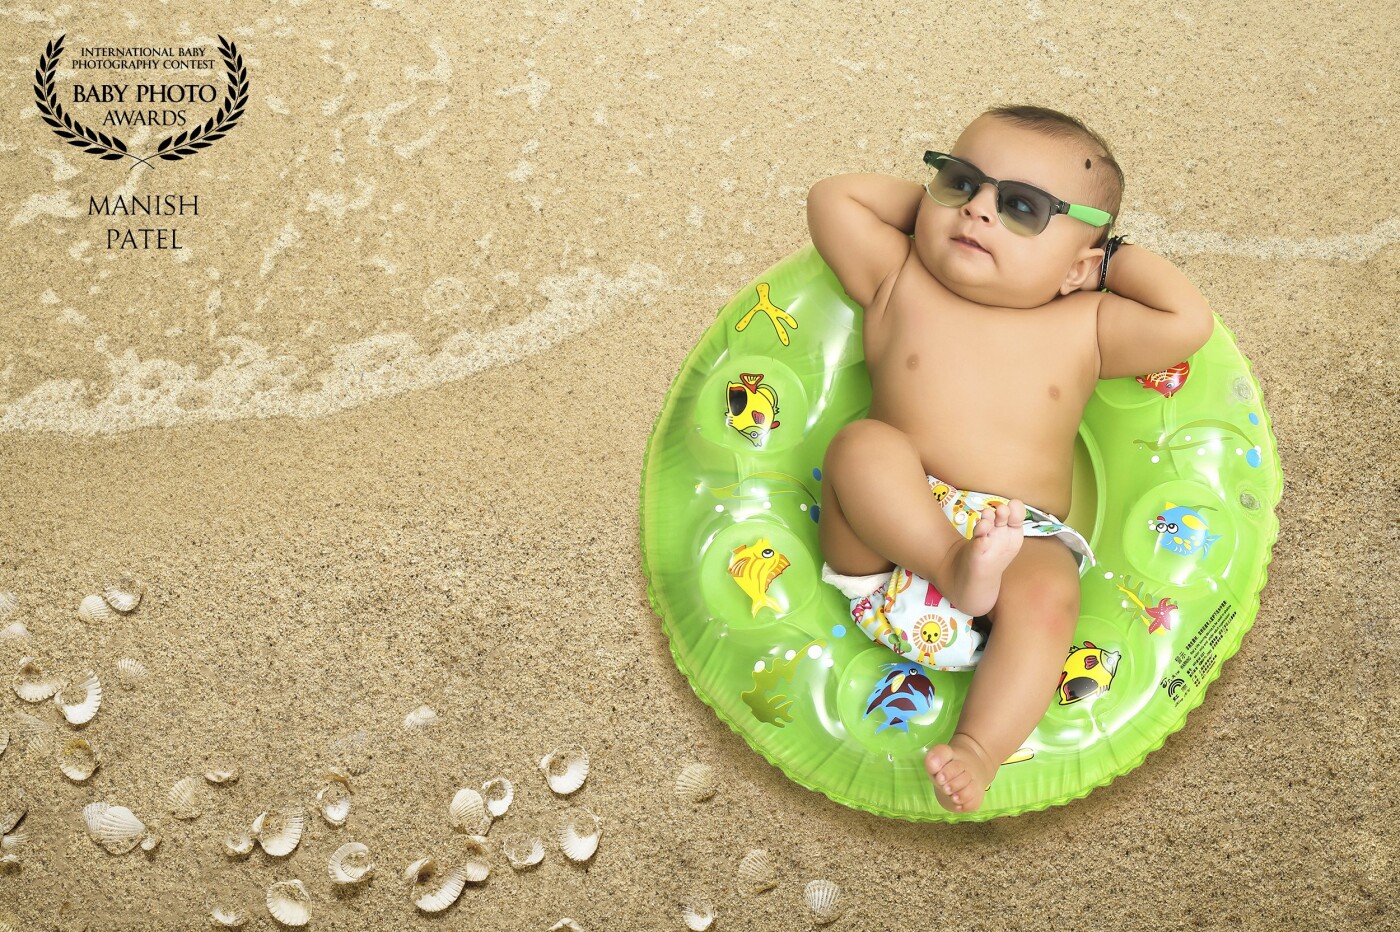 This image was taken in Studio. The little boy was getting a bit bored, so I encouraged him to have some play time and concept of beach theme around. I love the expression on his face capturing childhood and playing. 